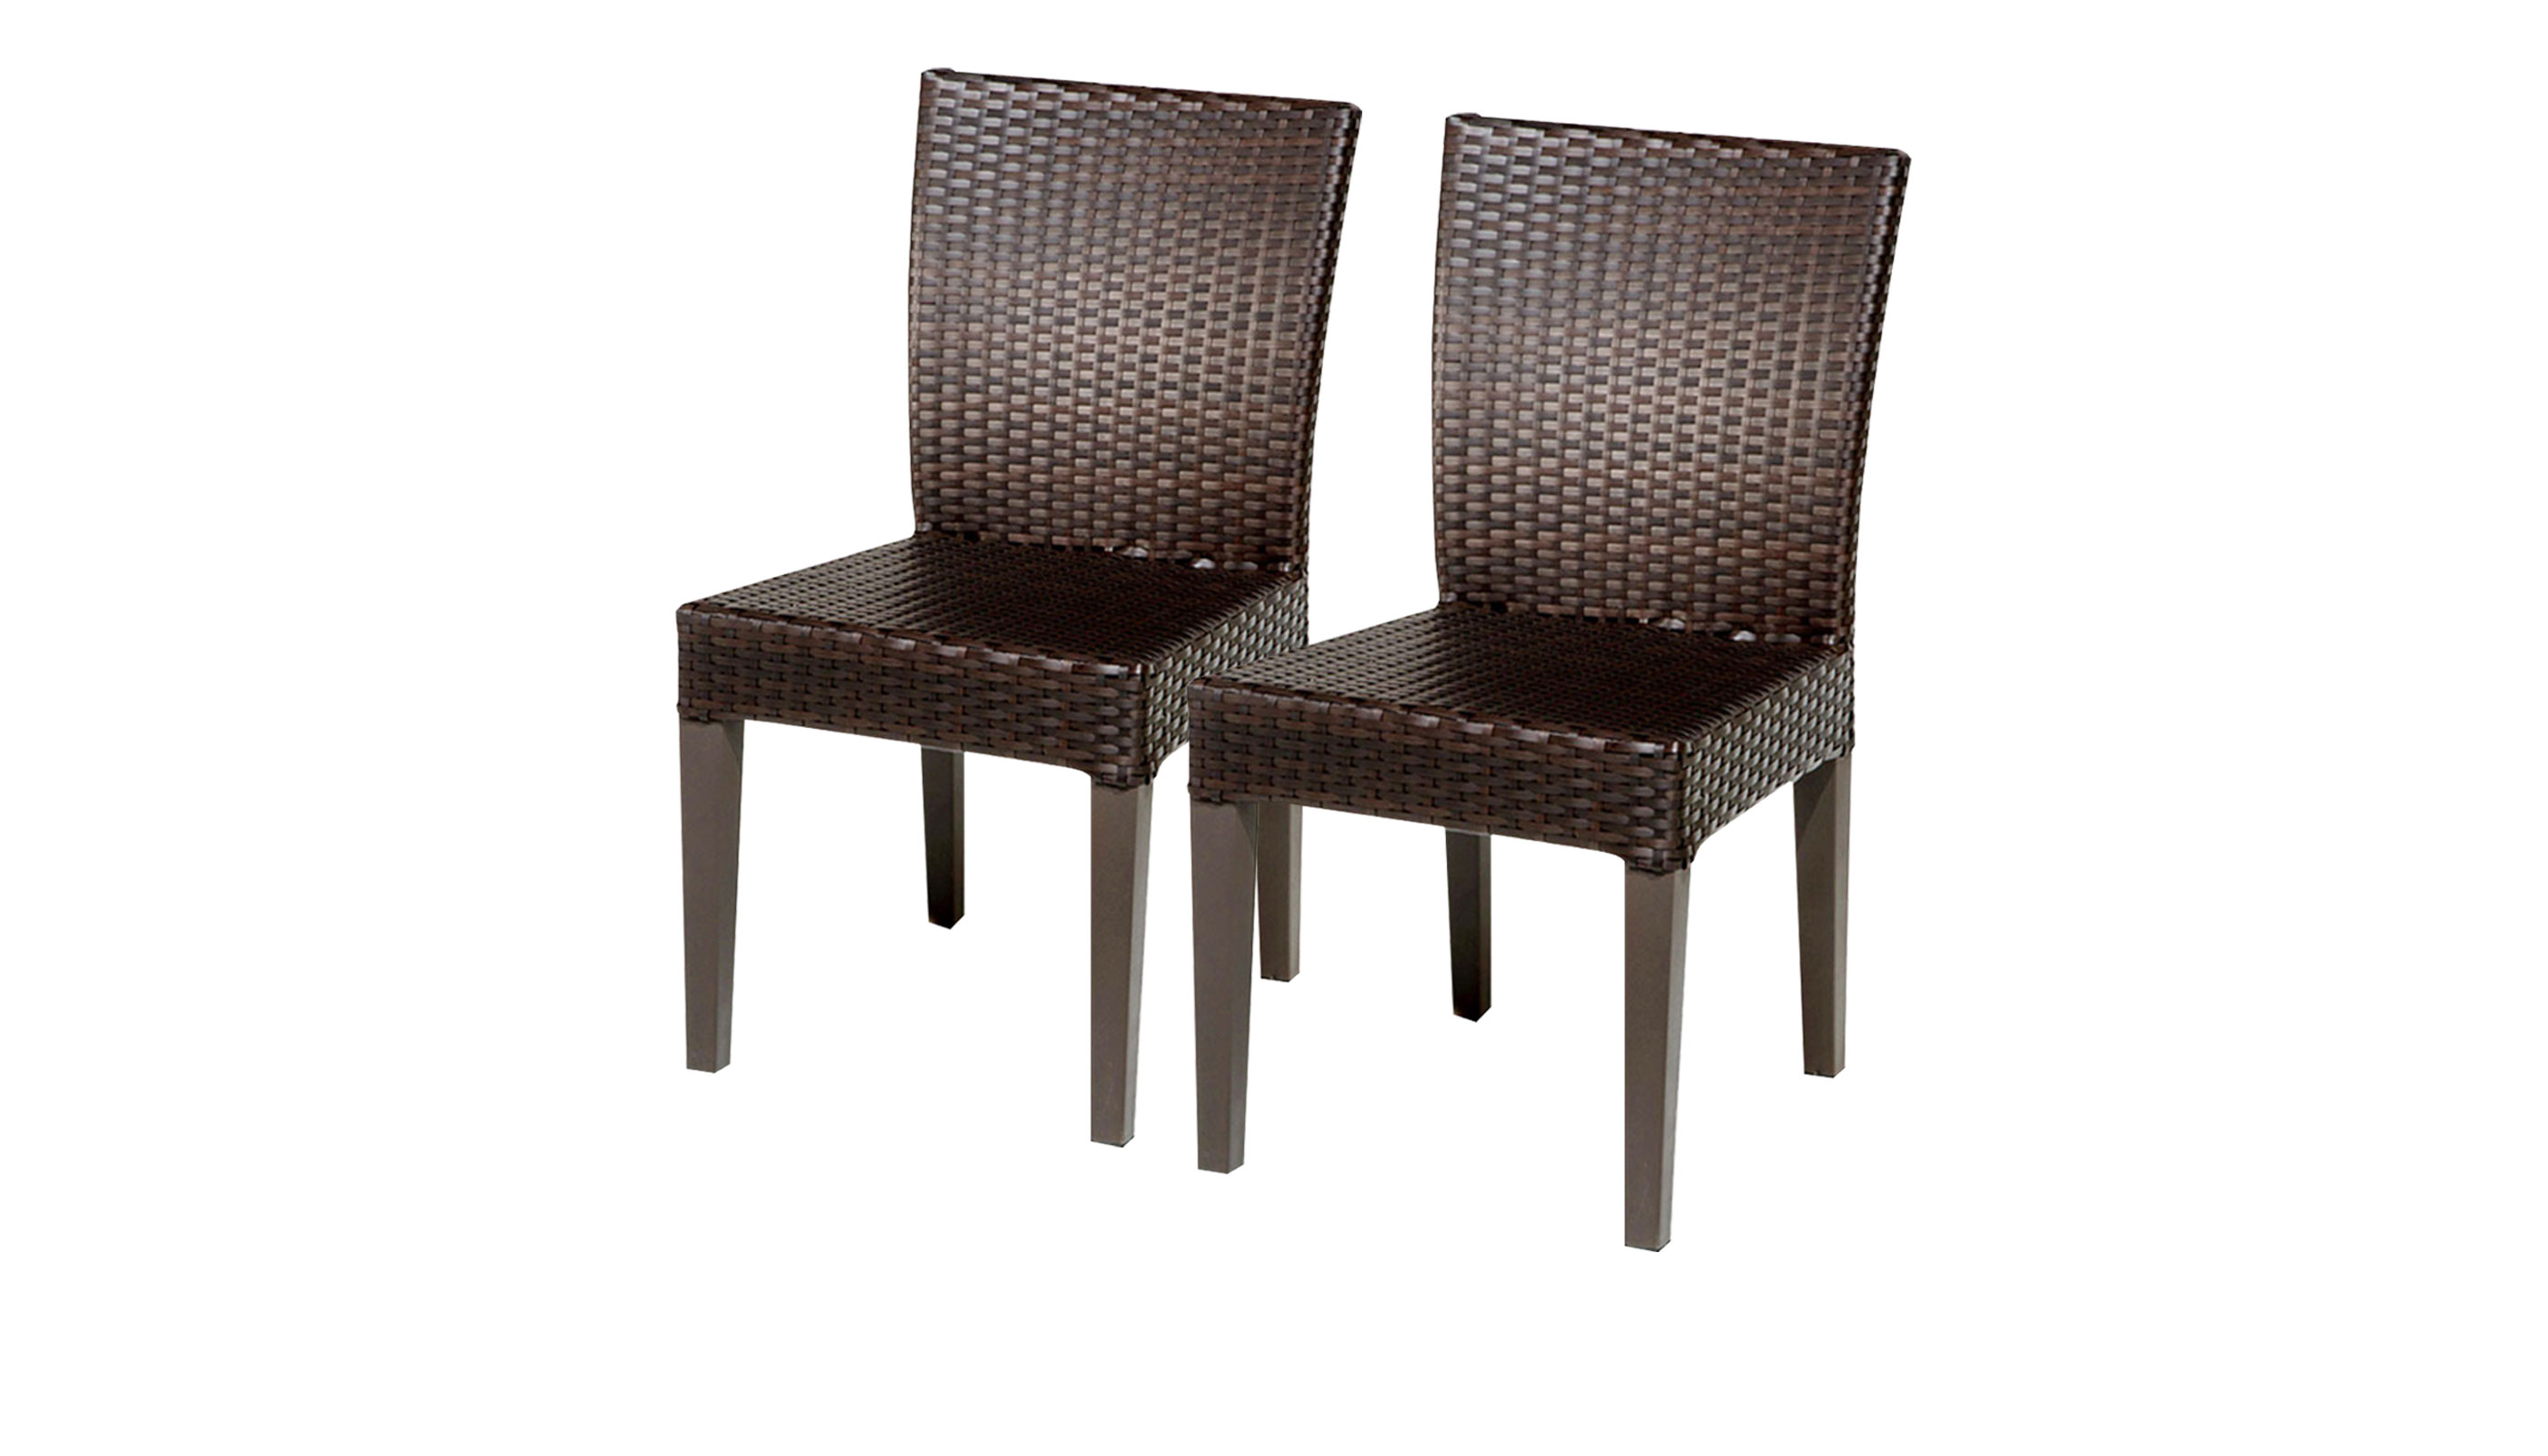 Barbados Rectangular Outdoor Patio Dining Table with 2 Armless Chairs 2 Chairs w/ Arms and 1 Bench - TK Classics